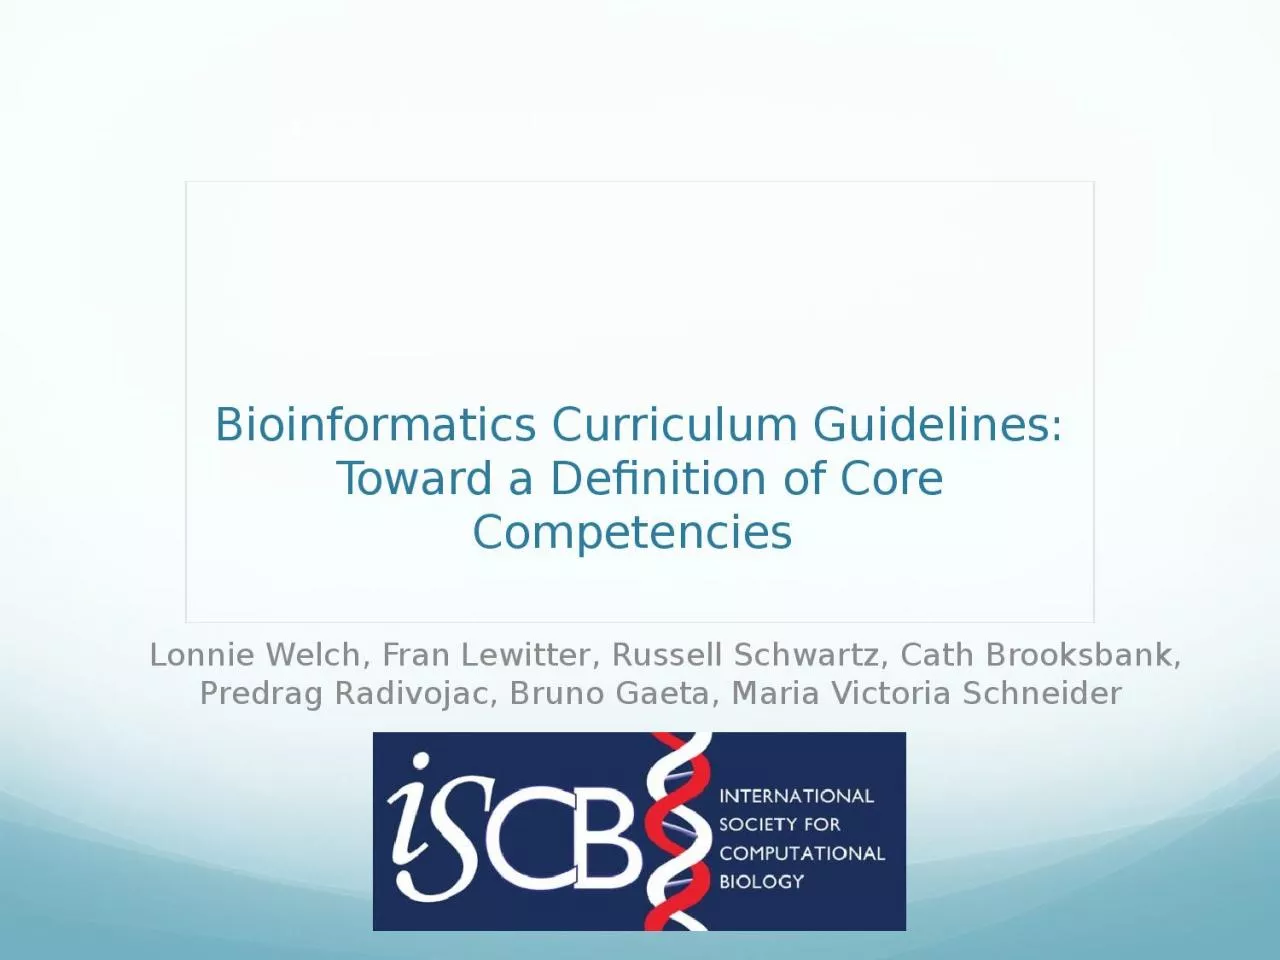 Bioinformatics Curriculum Guidelines: Toward a Definition of Core Competencies